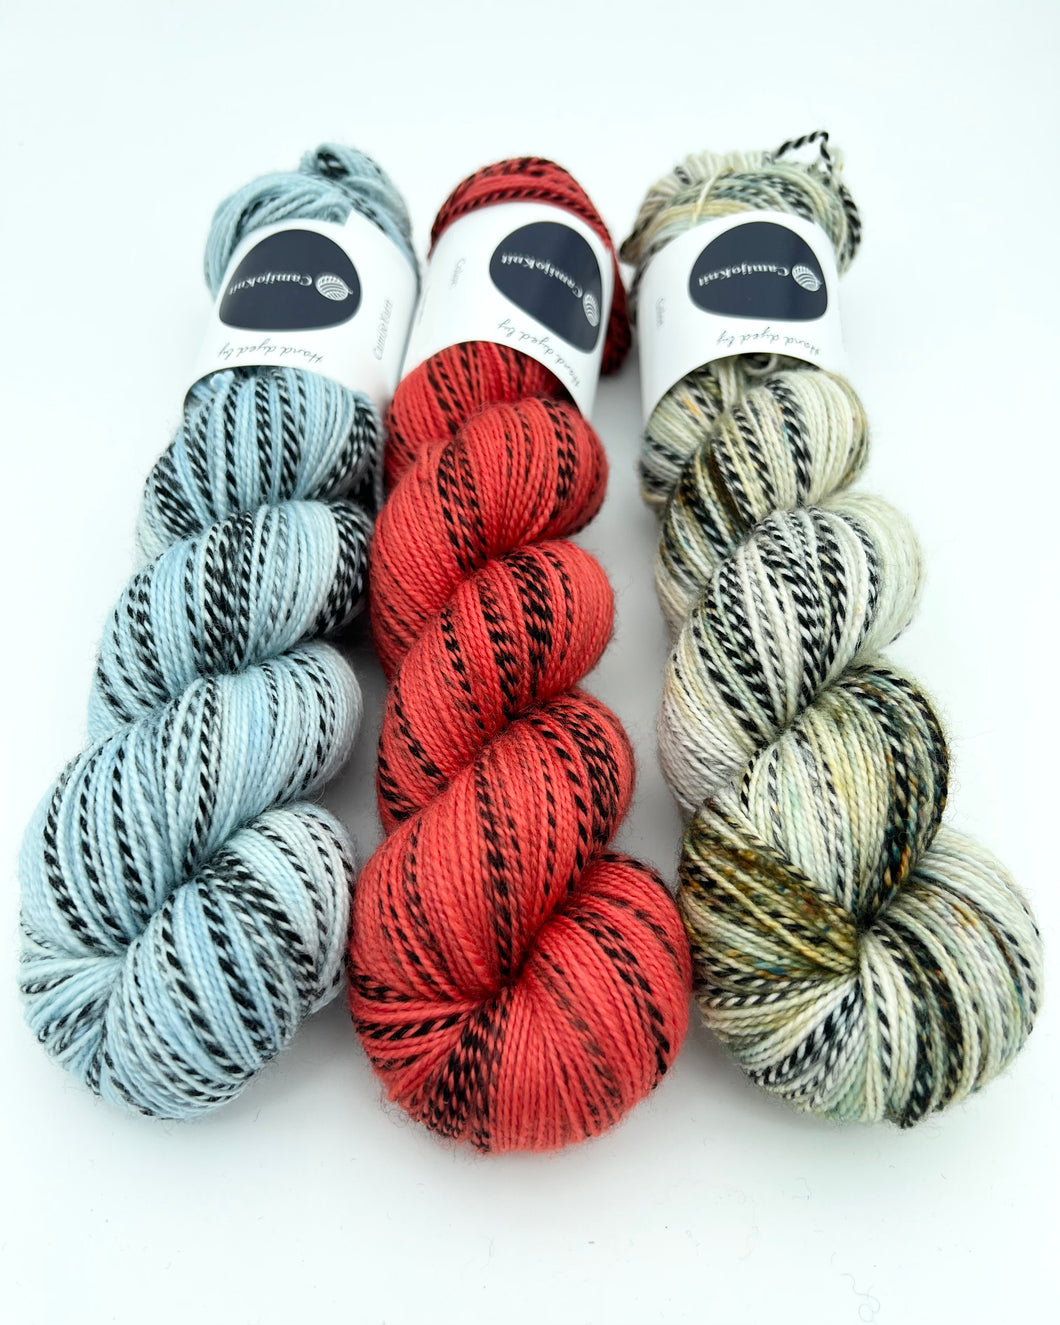 Kit: Roller Coaster Shawl, Merino Sock: Tomato, Baby, is that your name?, Happy Hunter